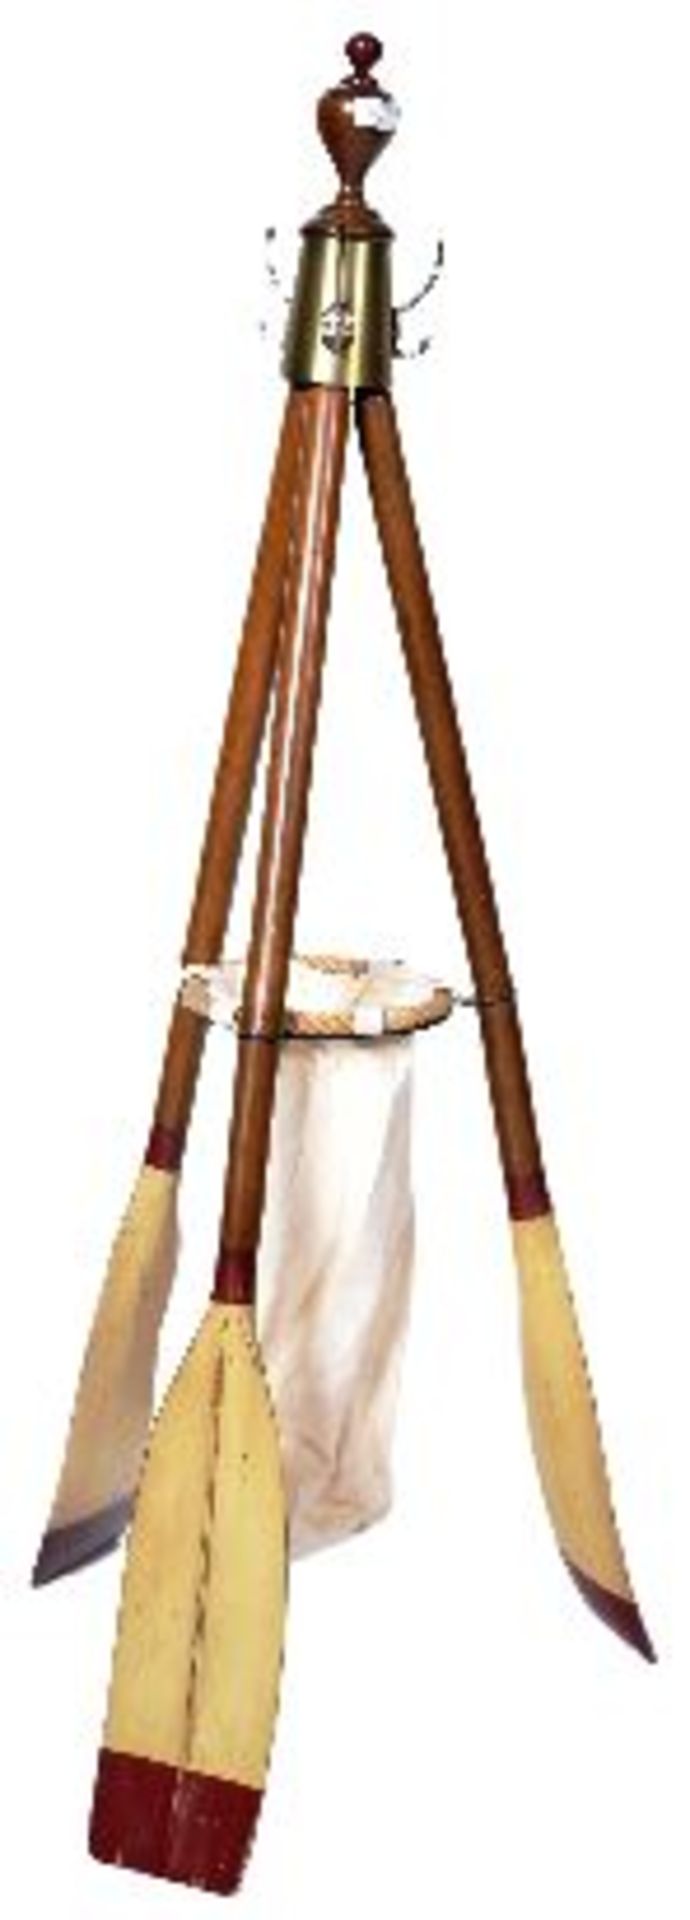 20TH CENTURY BOATING INTEREST COAT / STICK OAR STAND